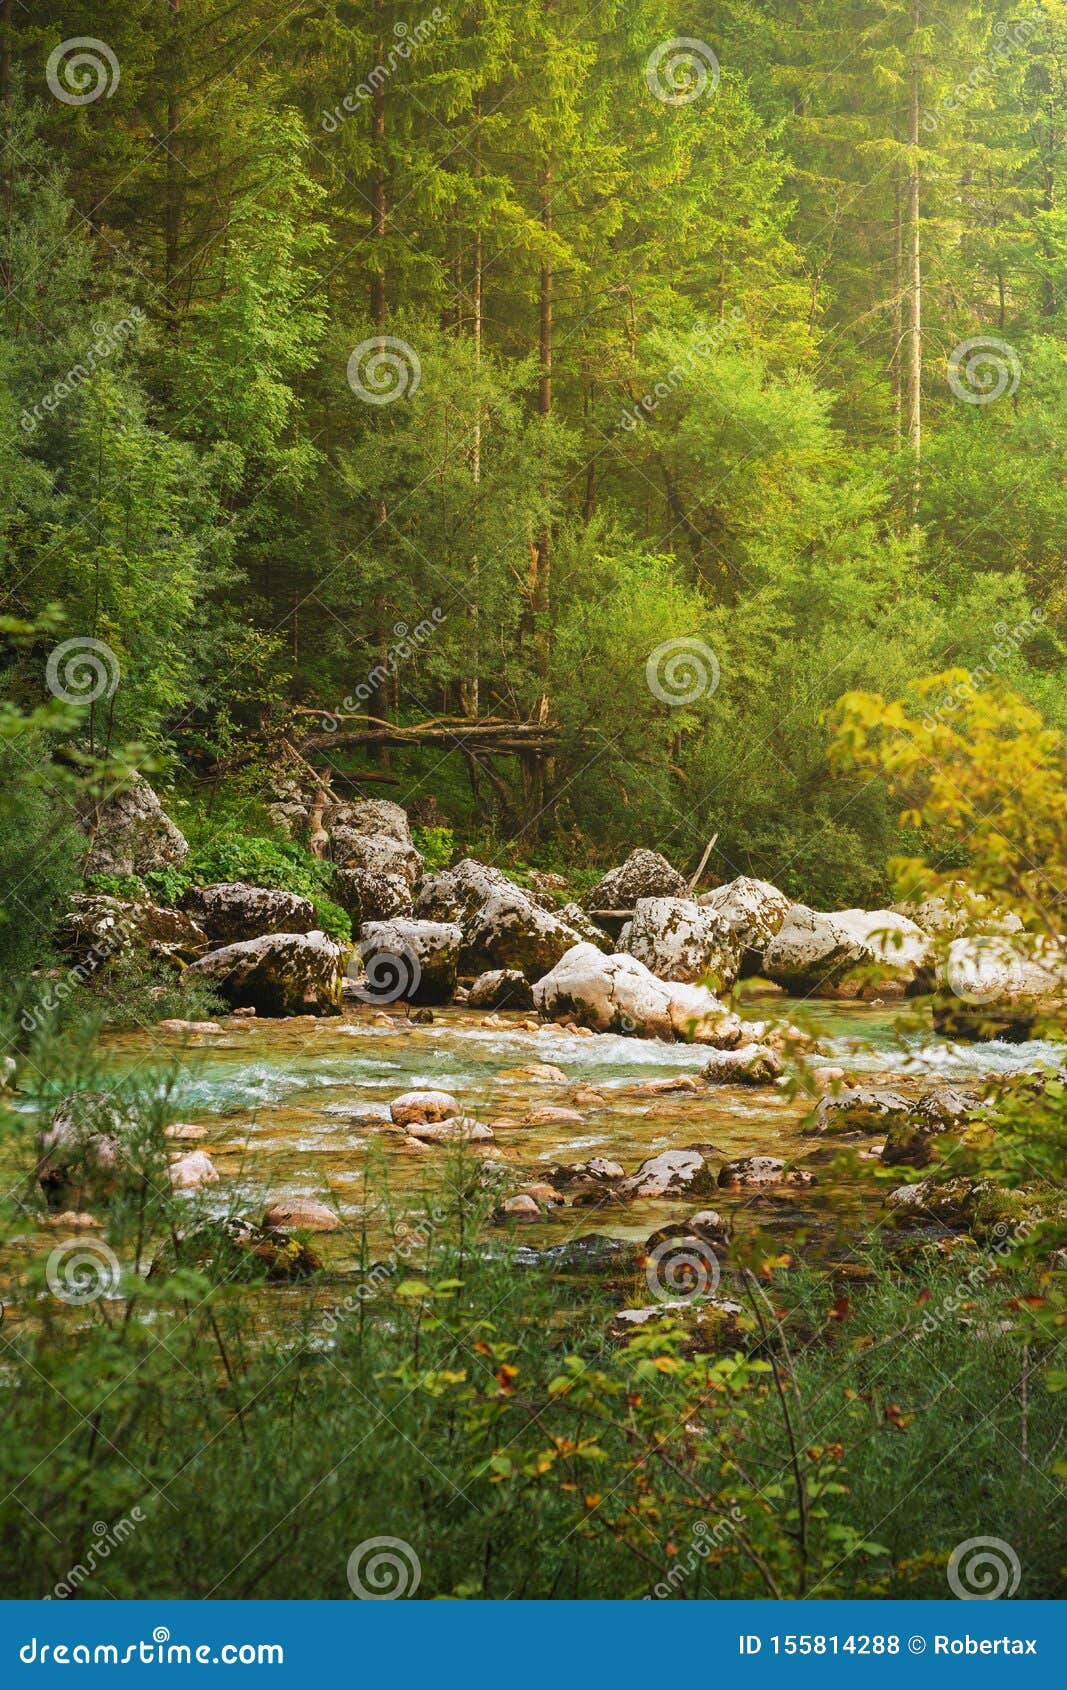 Peaceful Scene Of Naturally Fresh Emerald Color River In Green Forest Stock Photo Image Of Park Fresh